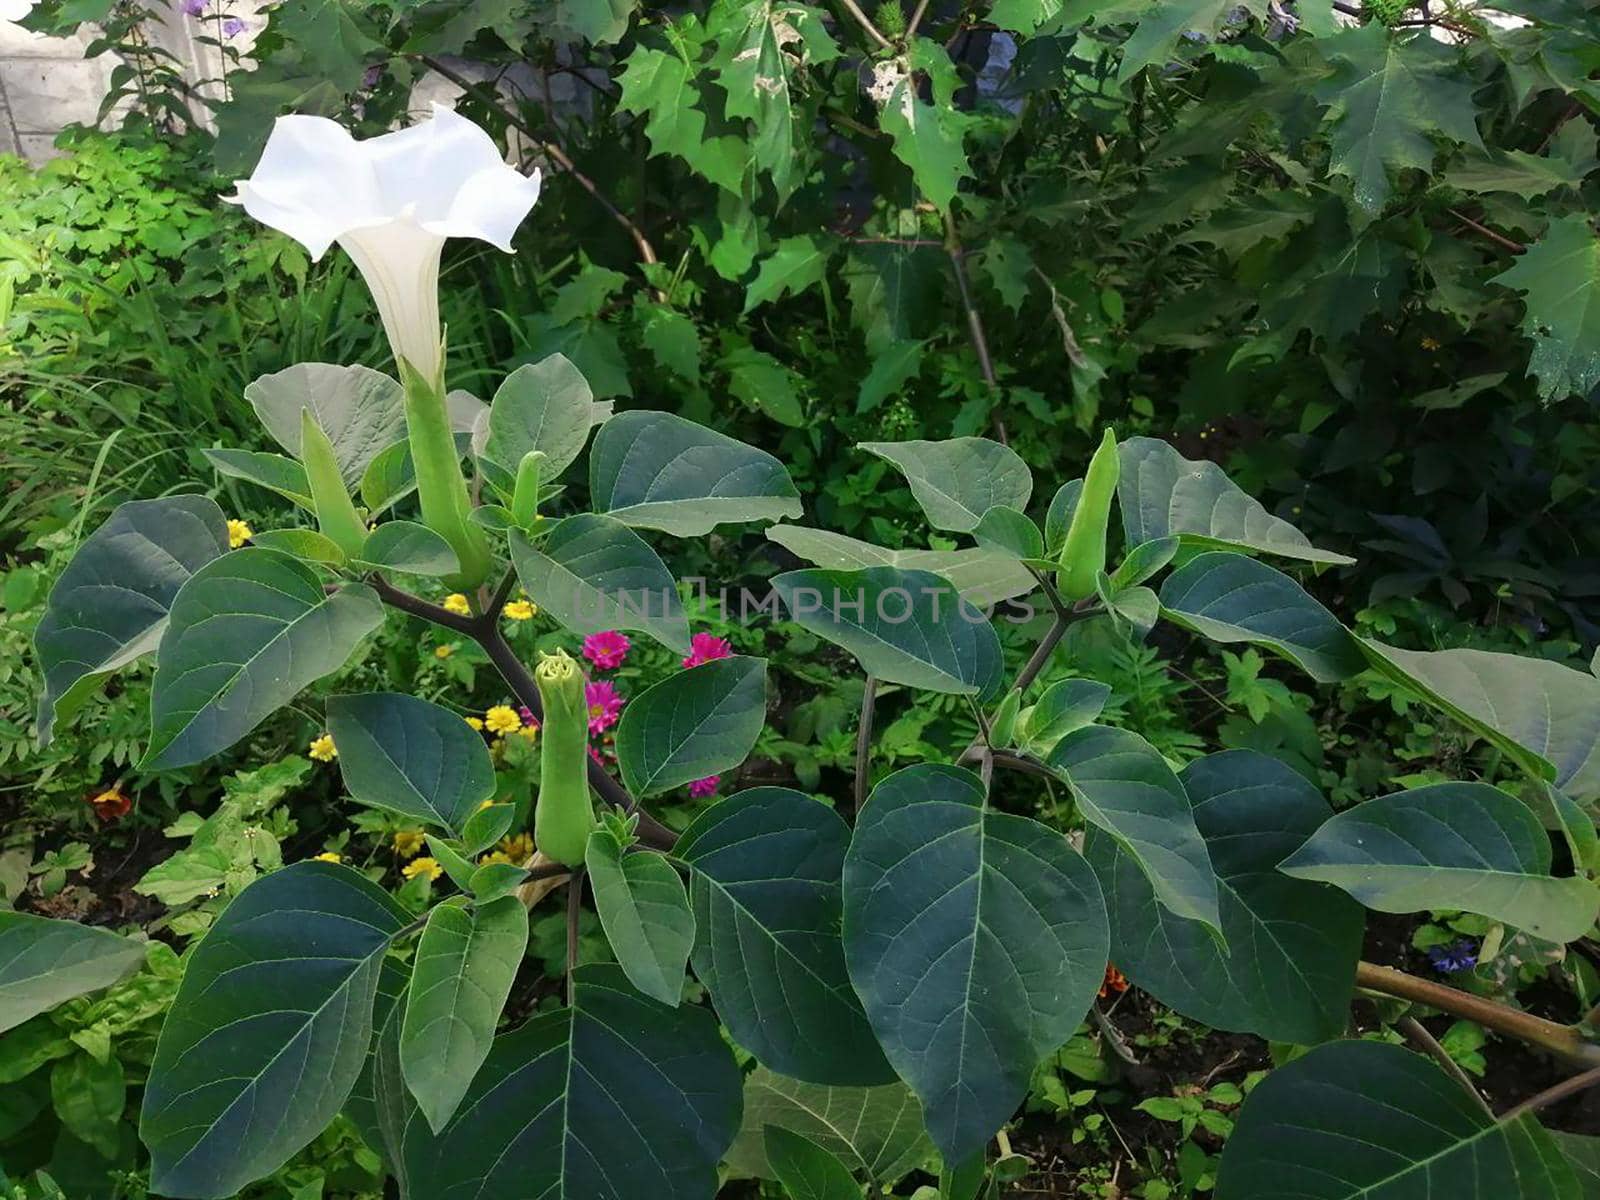 Datura flowers ordinary close-up very delicate and beautiful by fireFLYart